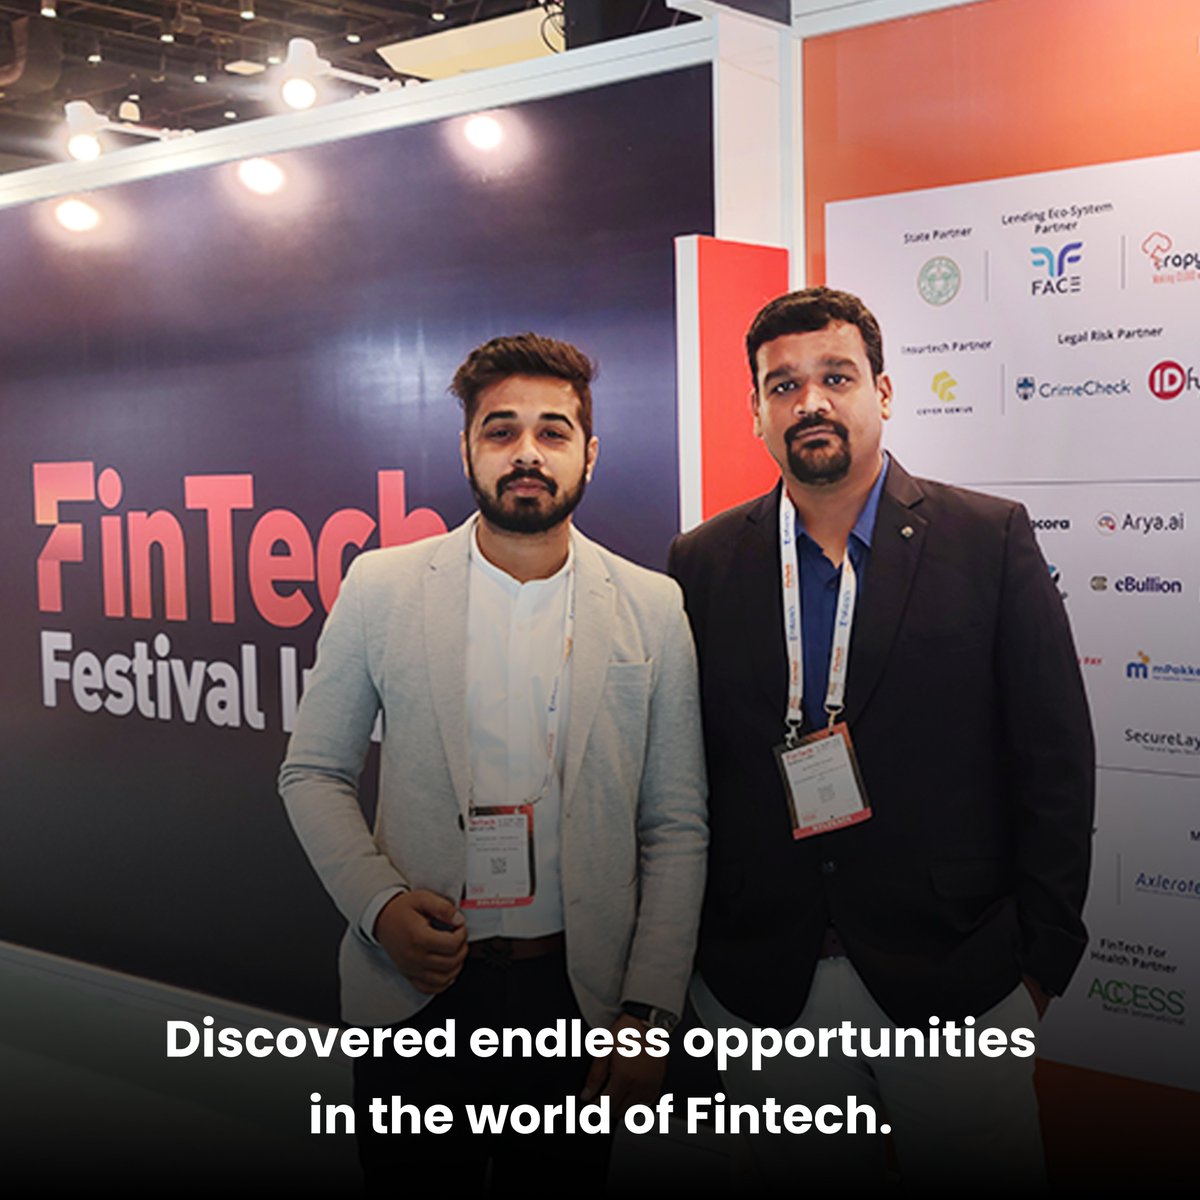 The energy and excitement at the fintech festival was palpable, and our team is grateful to be a part of it all!

Take a Glimpse of the event! 

@ffi_fintechfest  
#fintechfestival #fintech #fintechevent #techforceglobal #fintechfestivalindia2023 #fintechfestivalIndia